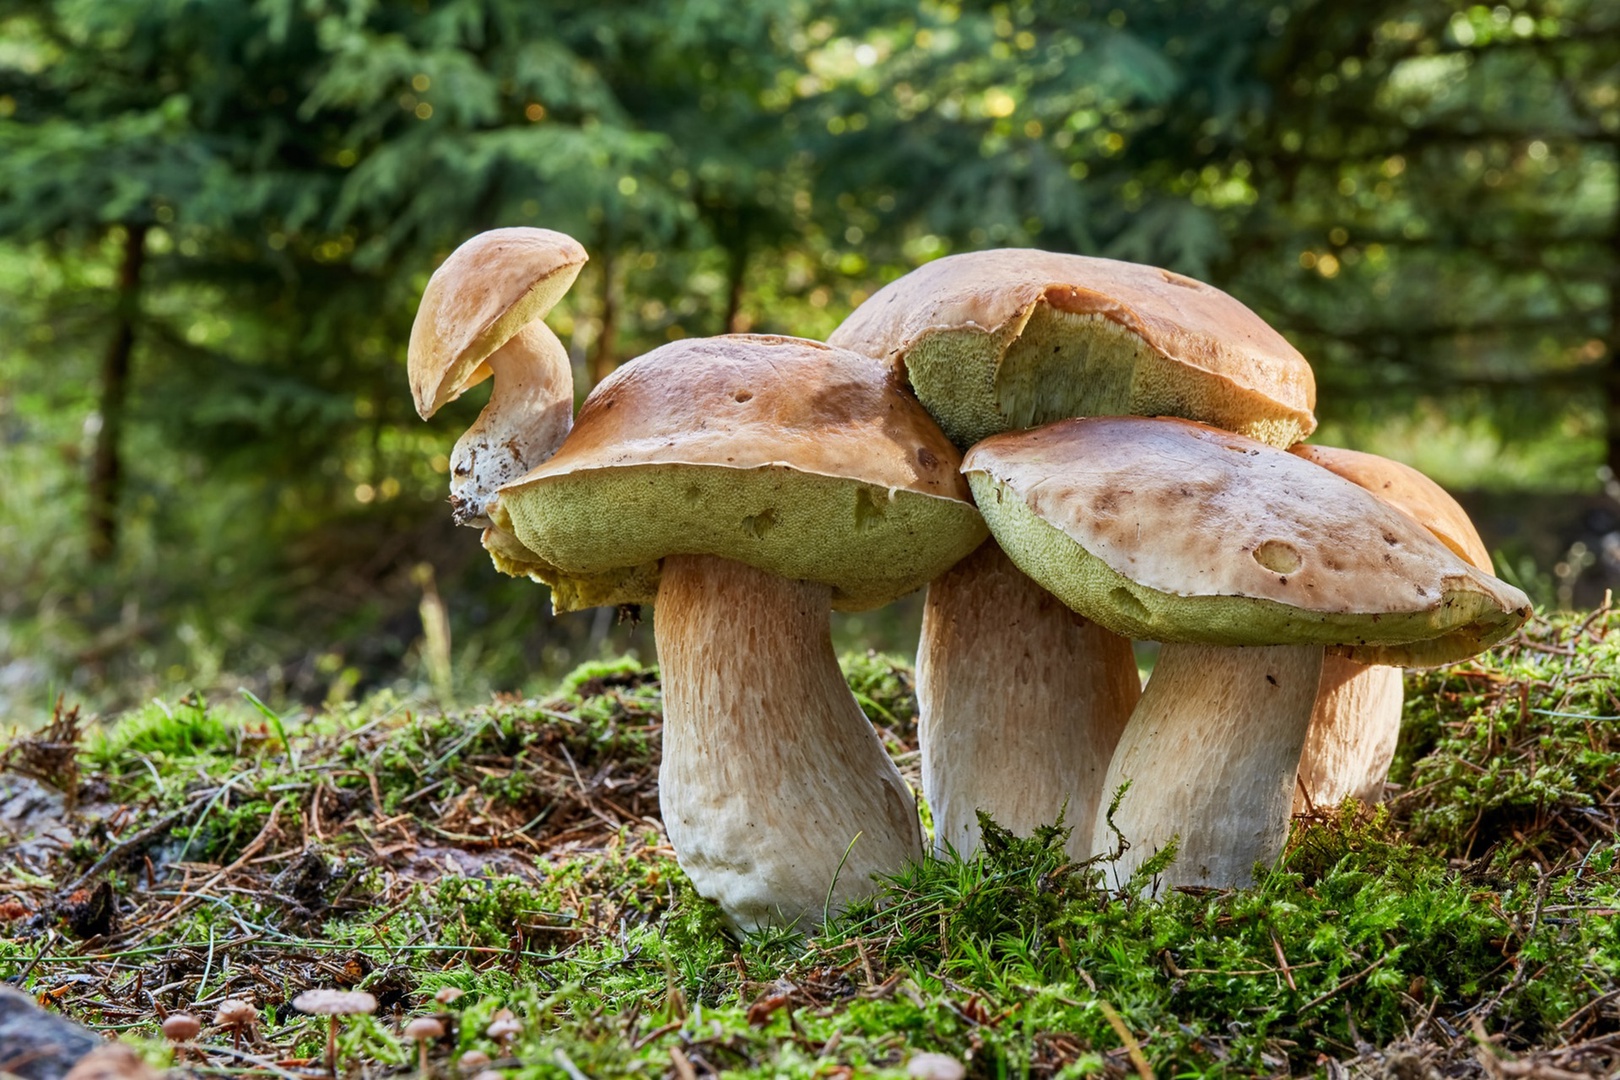 Porcini mushrooms and black truffles are featured in local dishes.